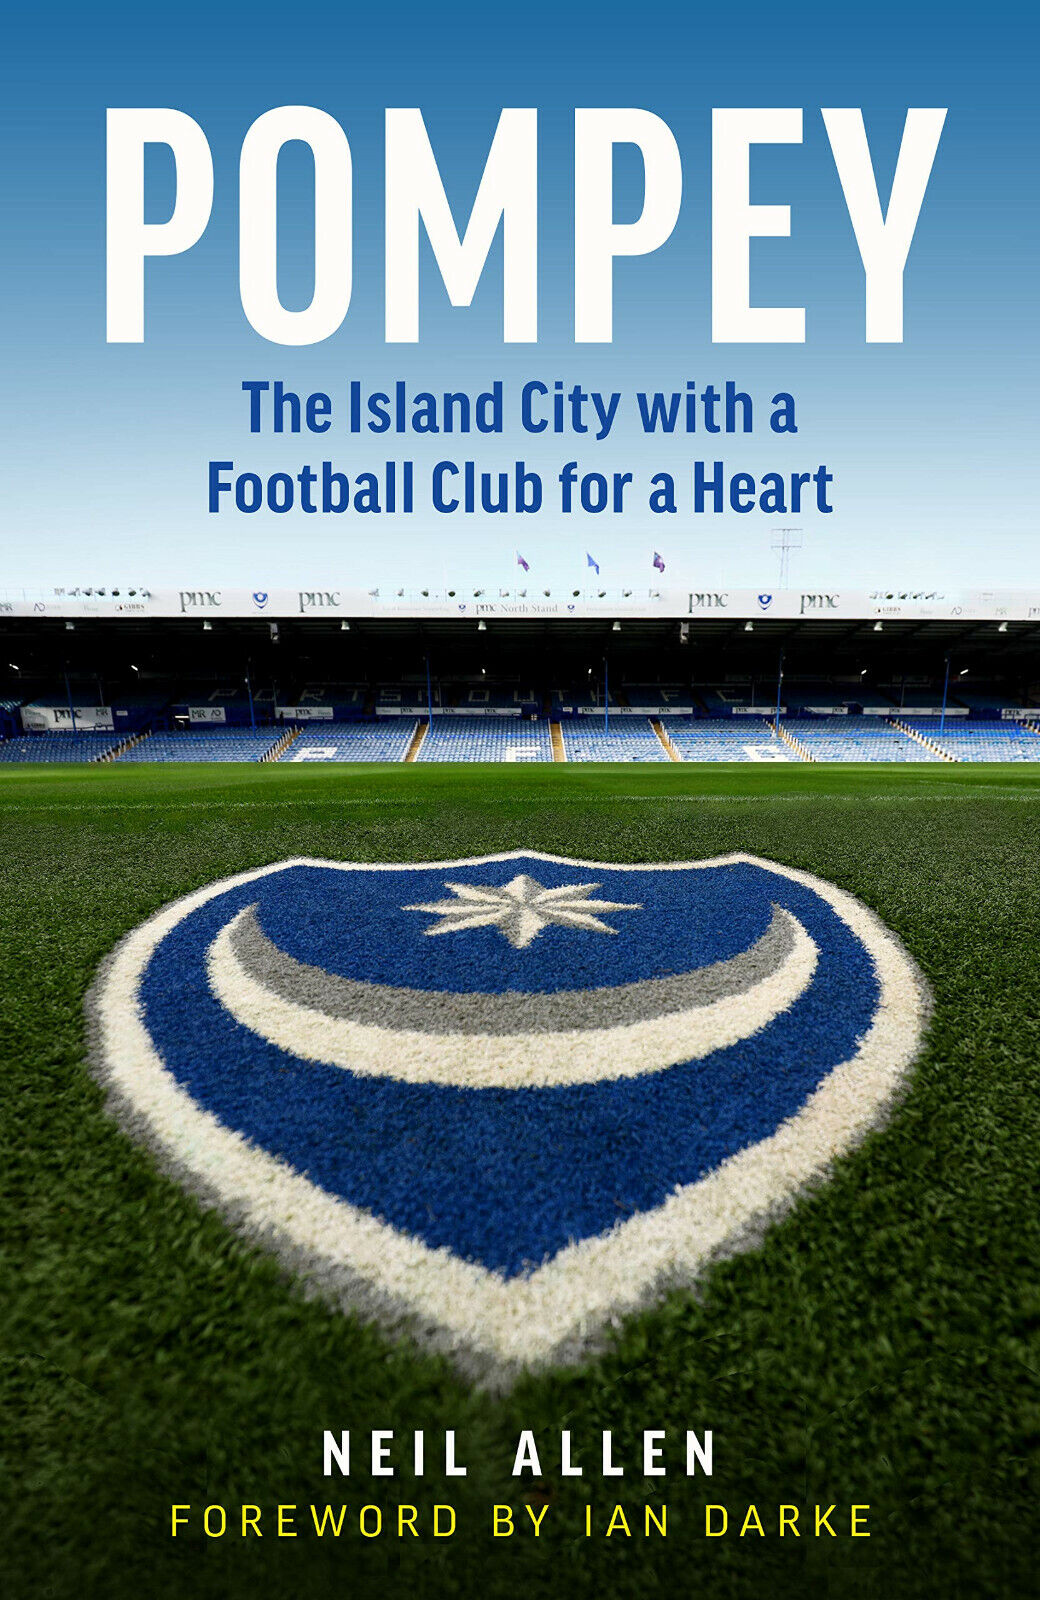 Pompey: The Island City with a Football Club for a Heart - Neil Allen - 2020 libro usato